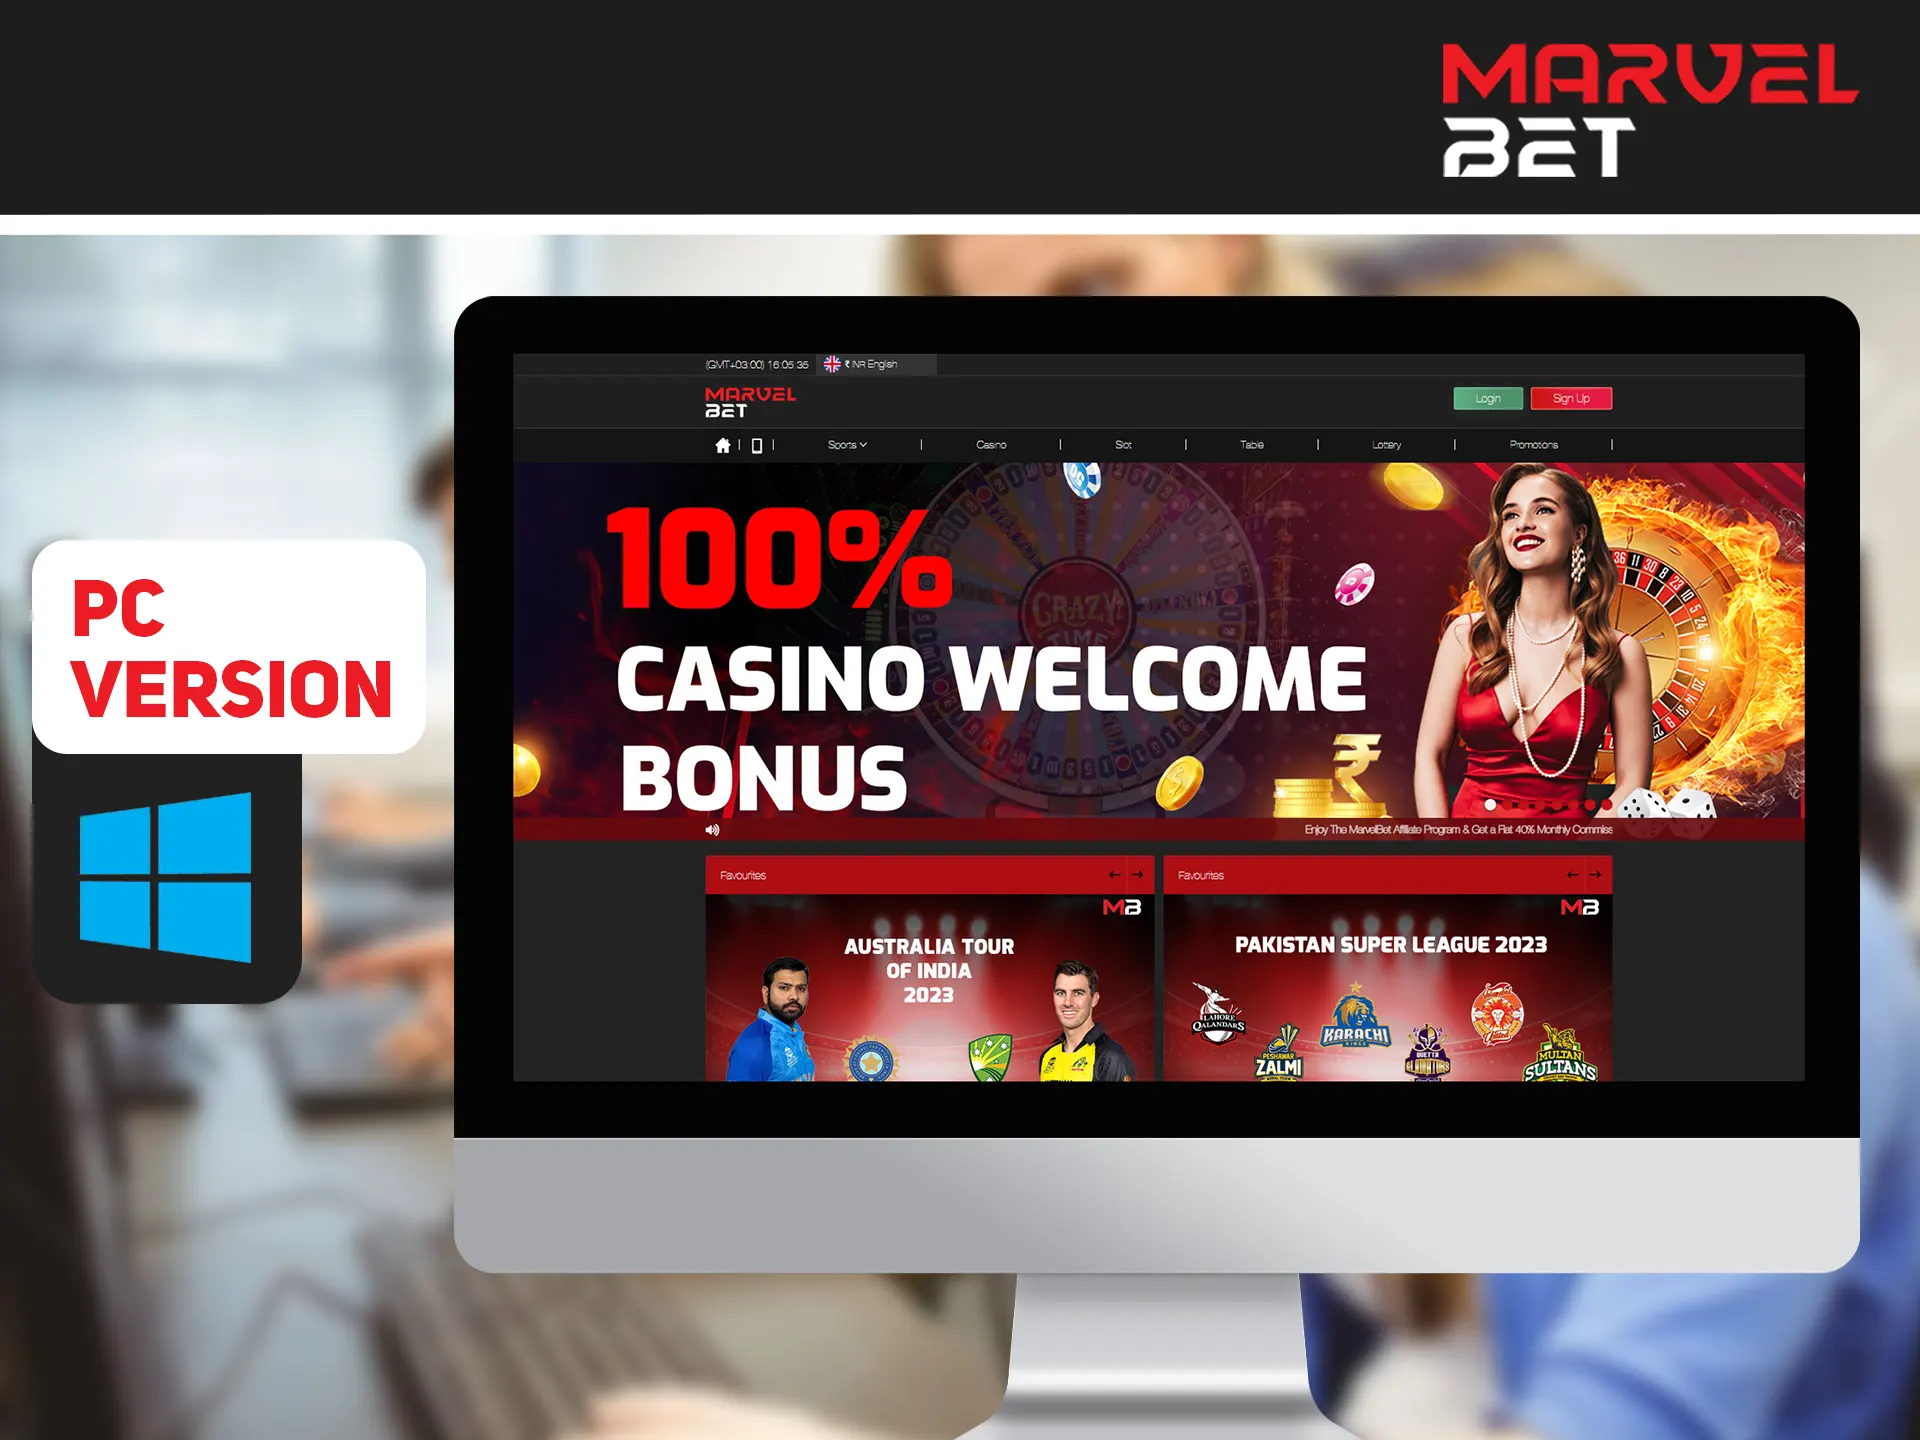 Bet on sports and play Marvelbet casino on any PC with internet.